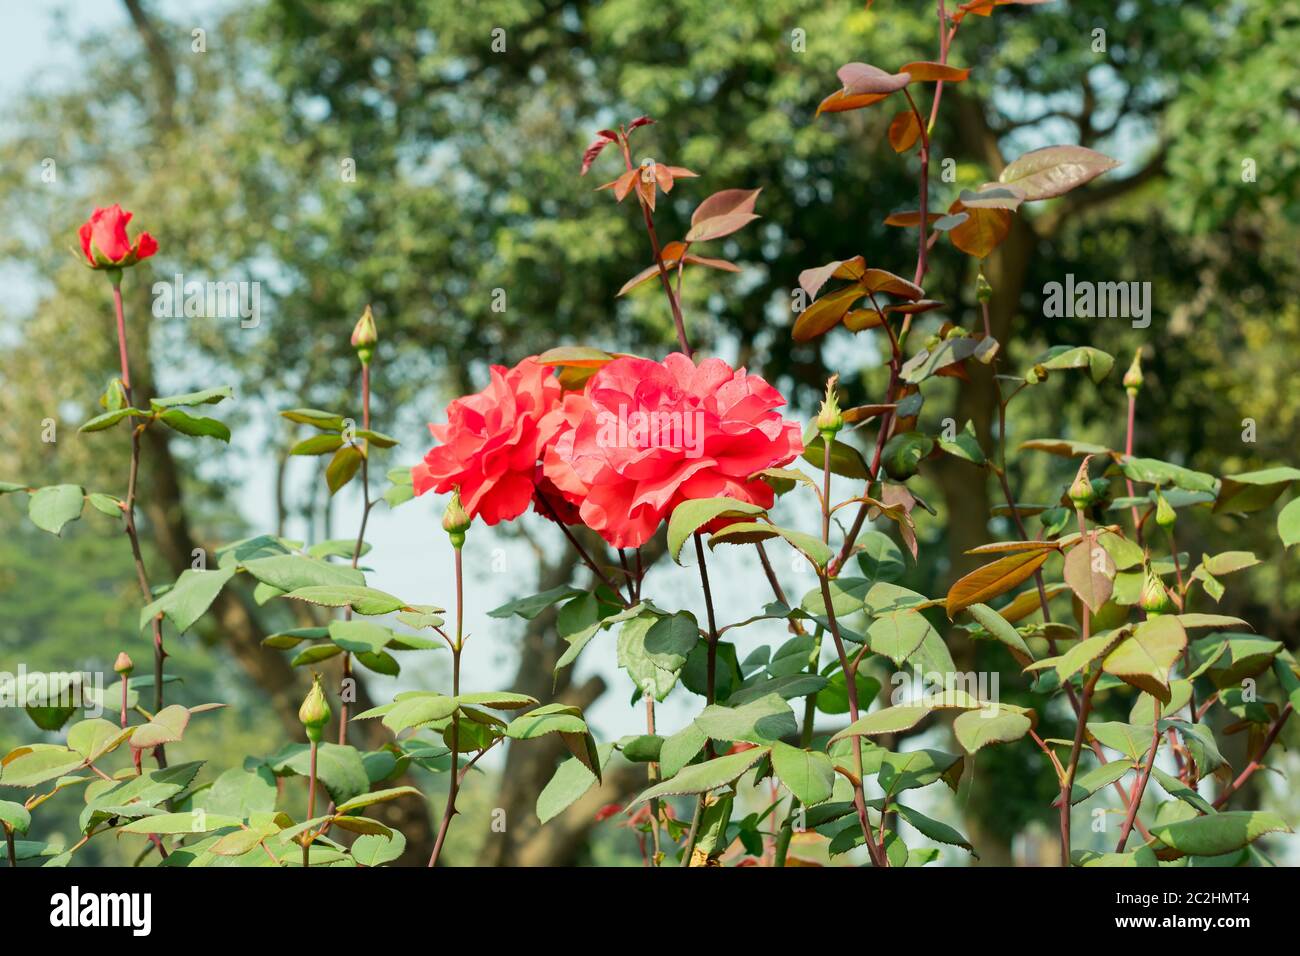 A Red rose - Genus Rosa family Rosaceae. An shrubs with stems sharp prickles. It is a sun loving plant Blooms in spring summer. Its symbol of friendsh Stock Photo